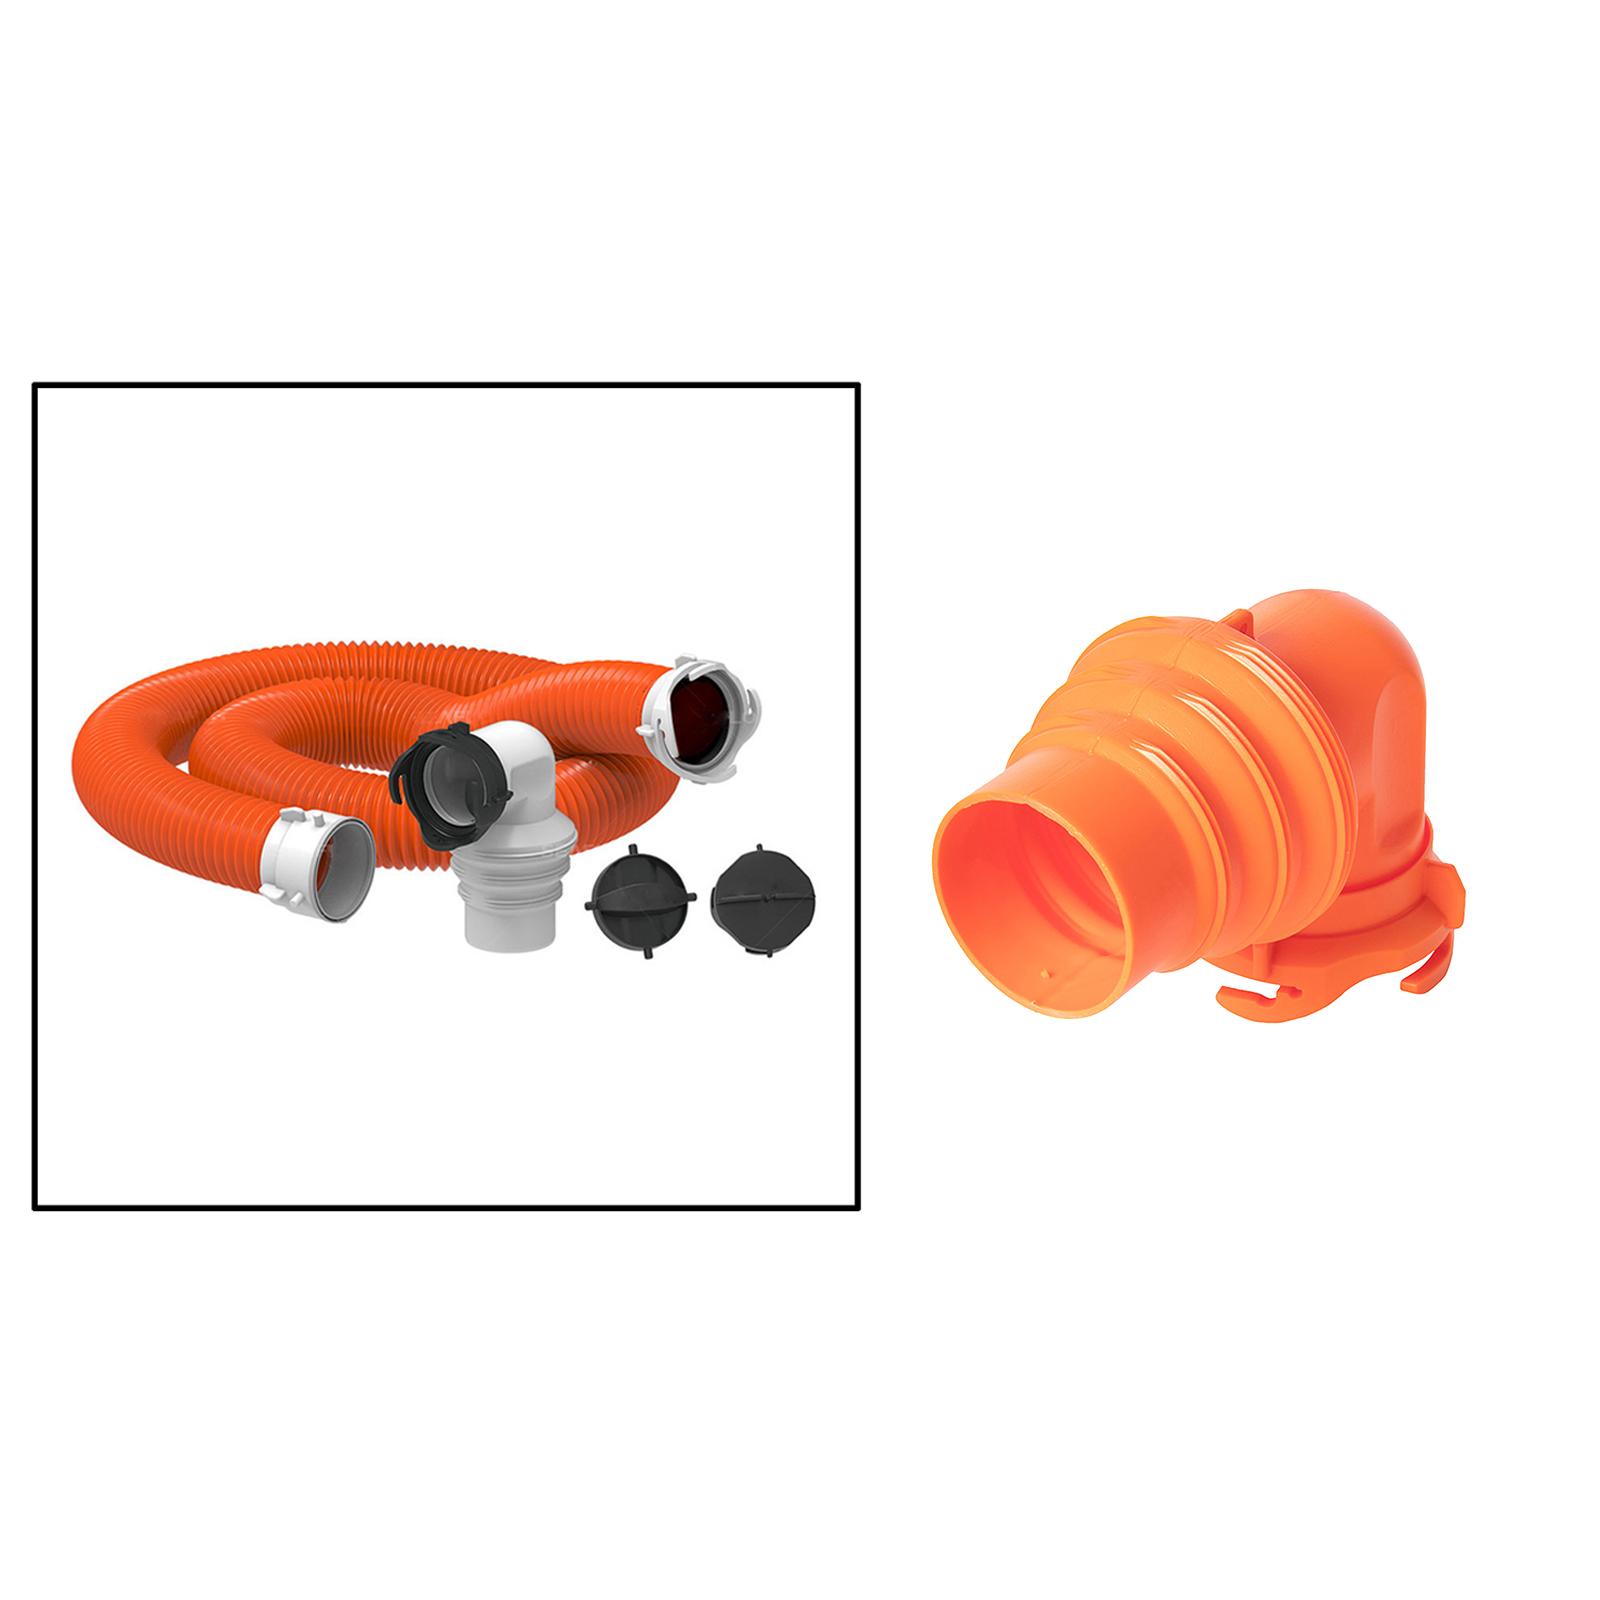 1Pcs 90 Degree Sewer Hose Swivel Elbow Fitting Adapter for RV Waste Tanks